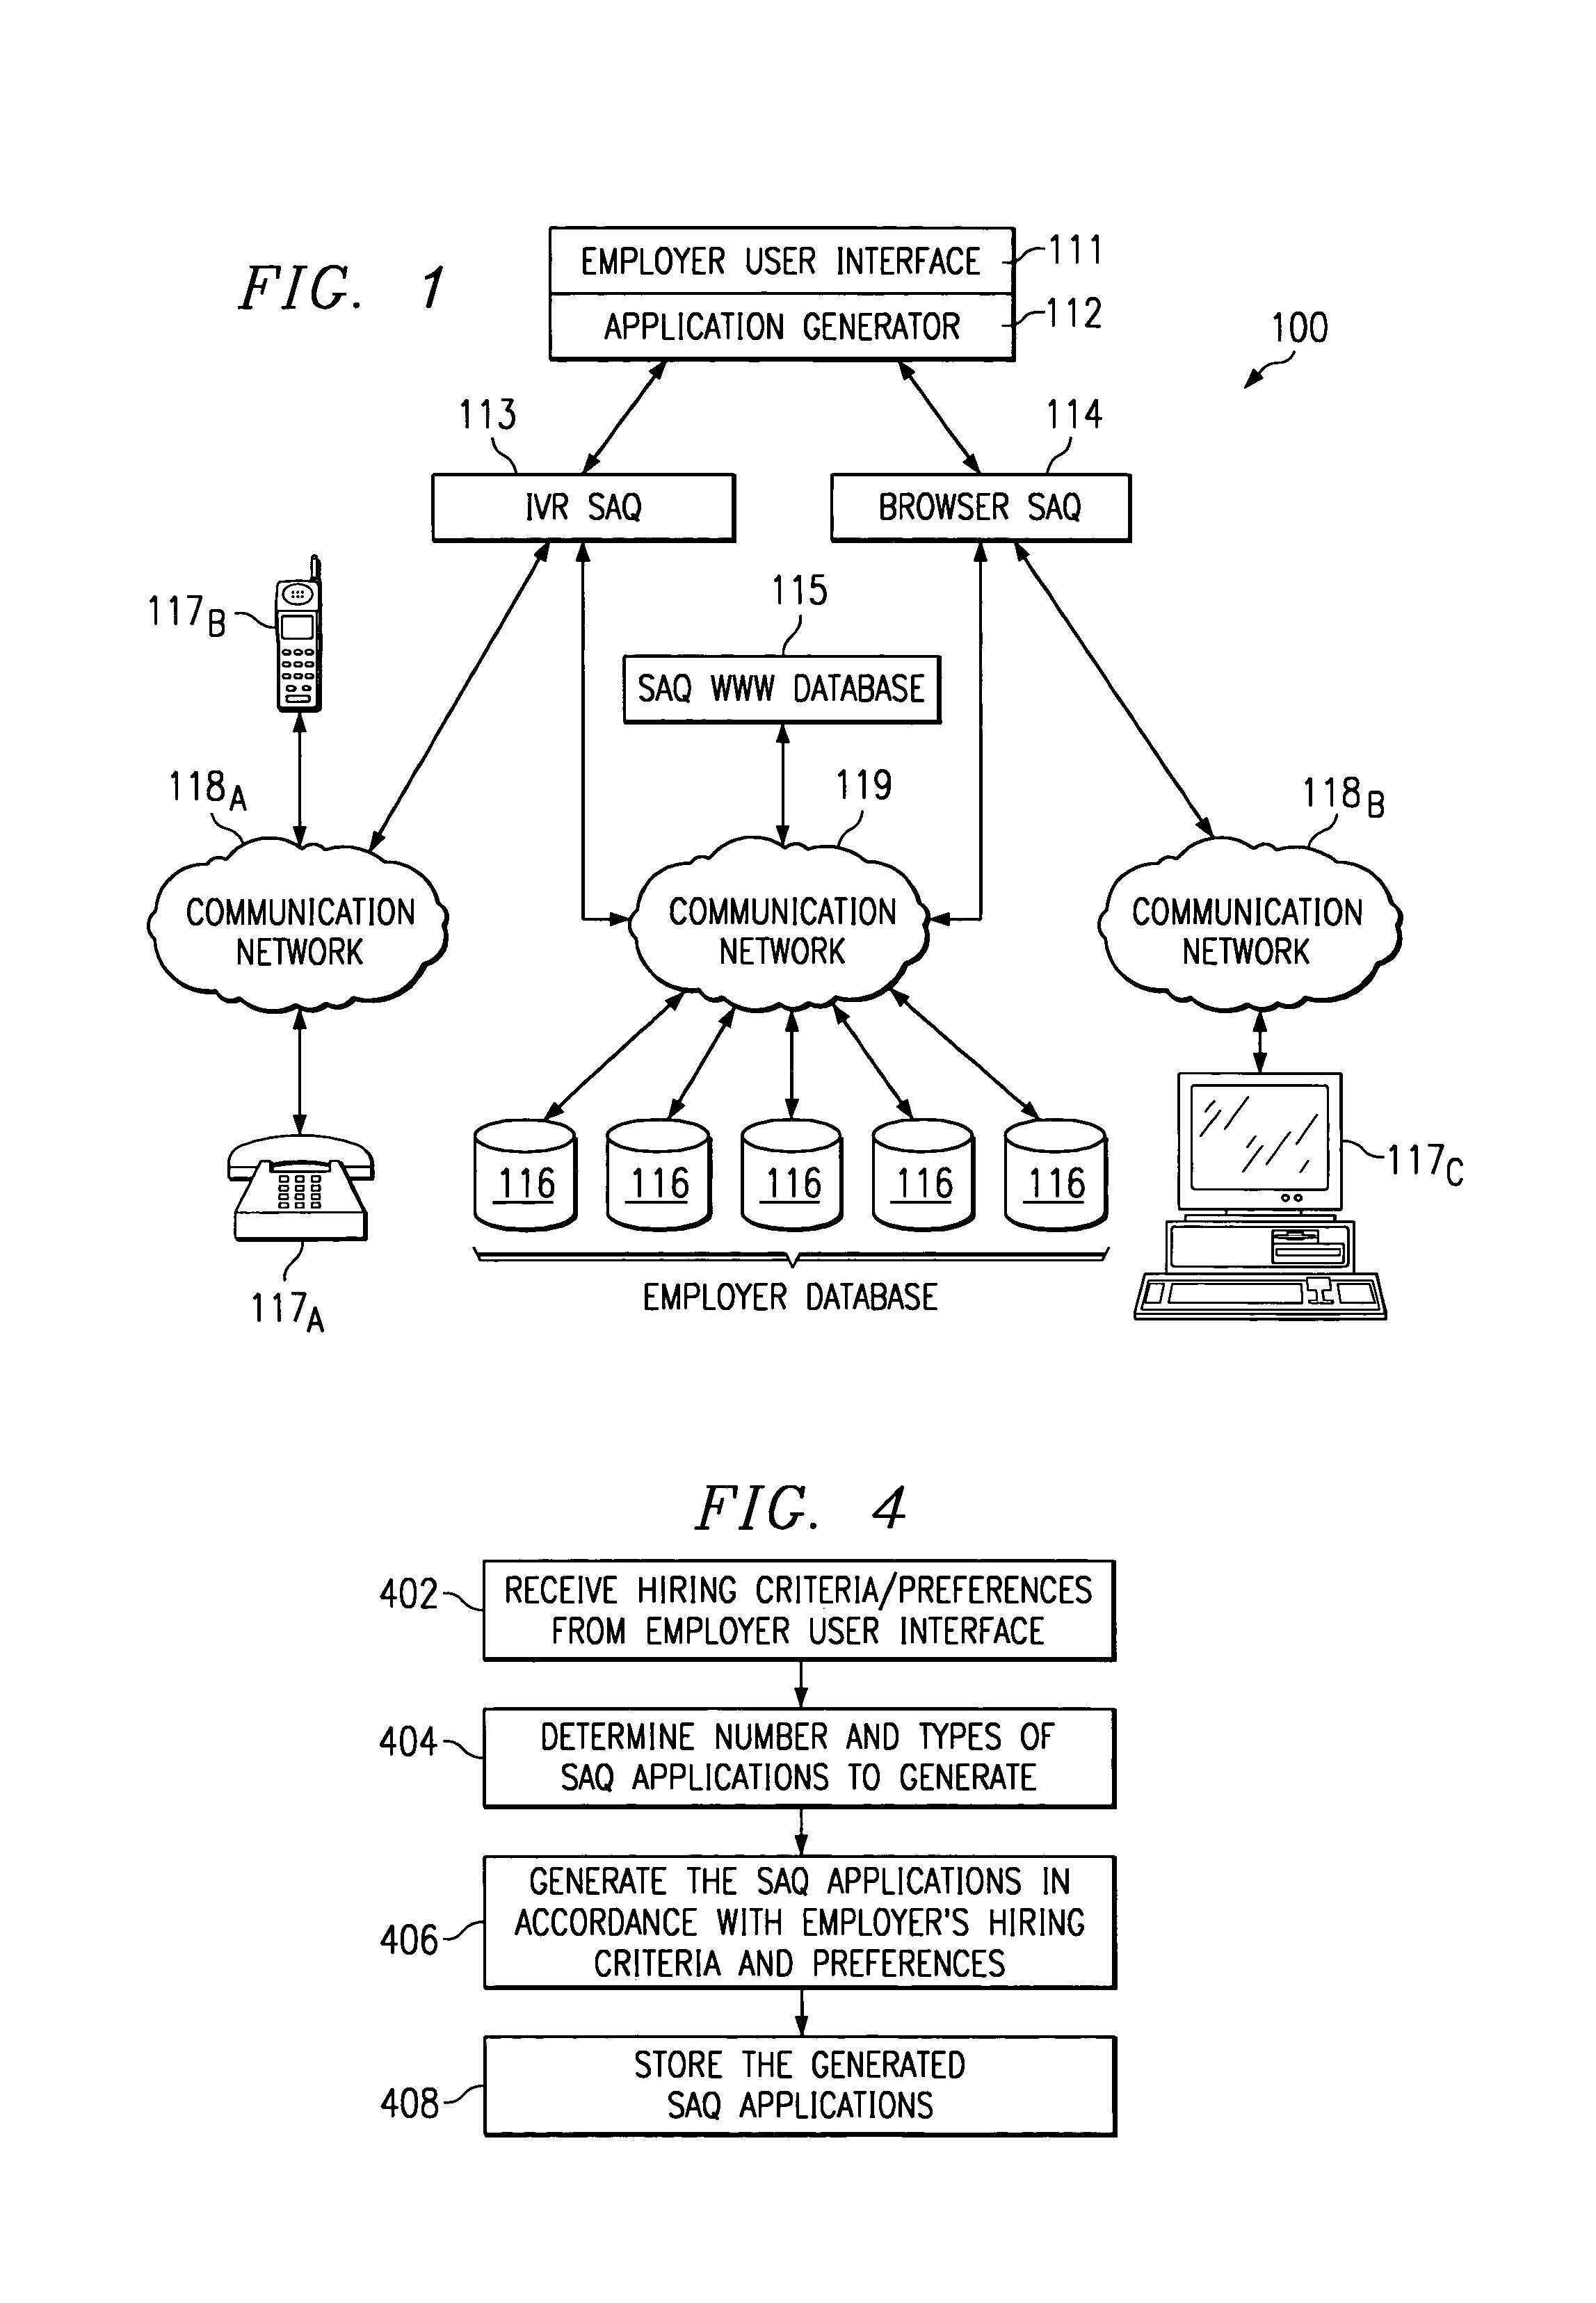 System and method for automated screening and qualification of employment candidates